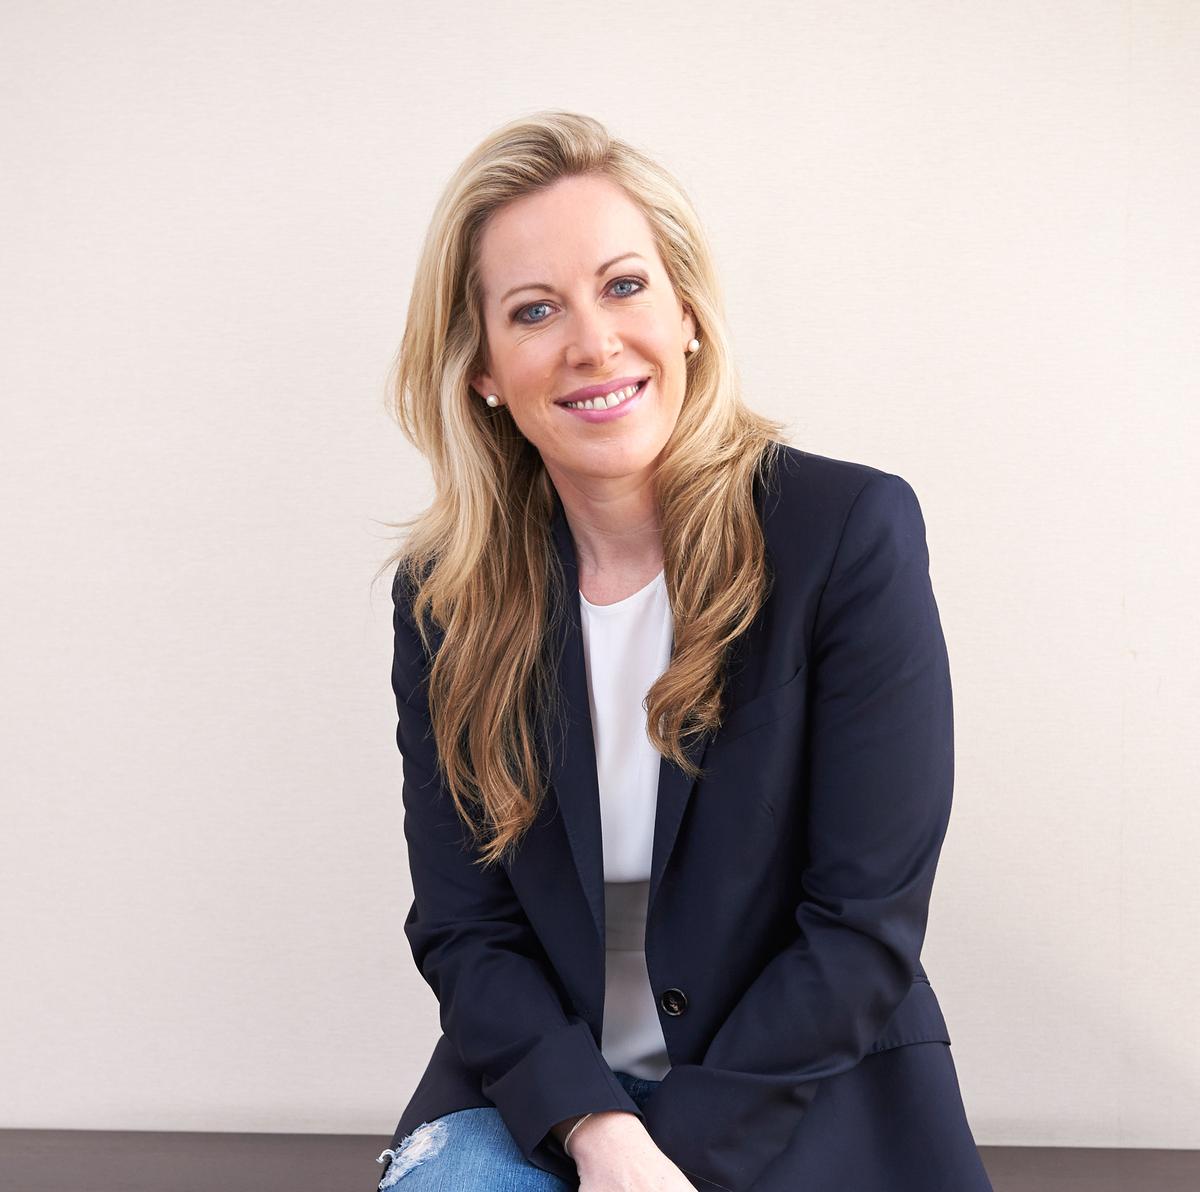 Moore, who has spent the last seven years working for Minor Hotel’s MSpa – most recently as group director of spa in Asia – said her experience in the industry inspired the company’s launch